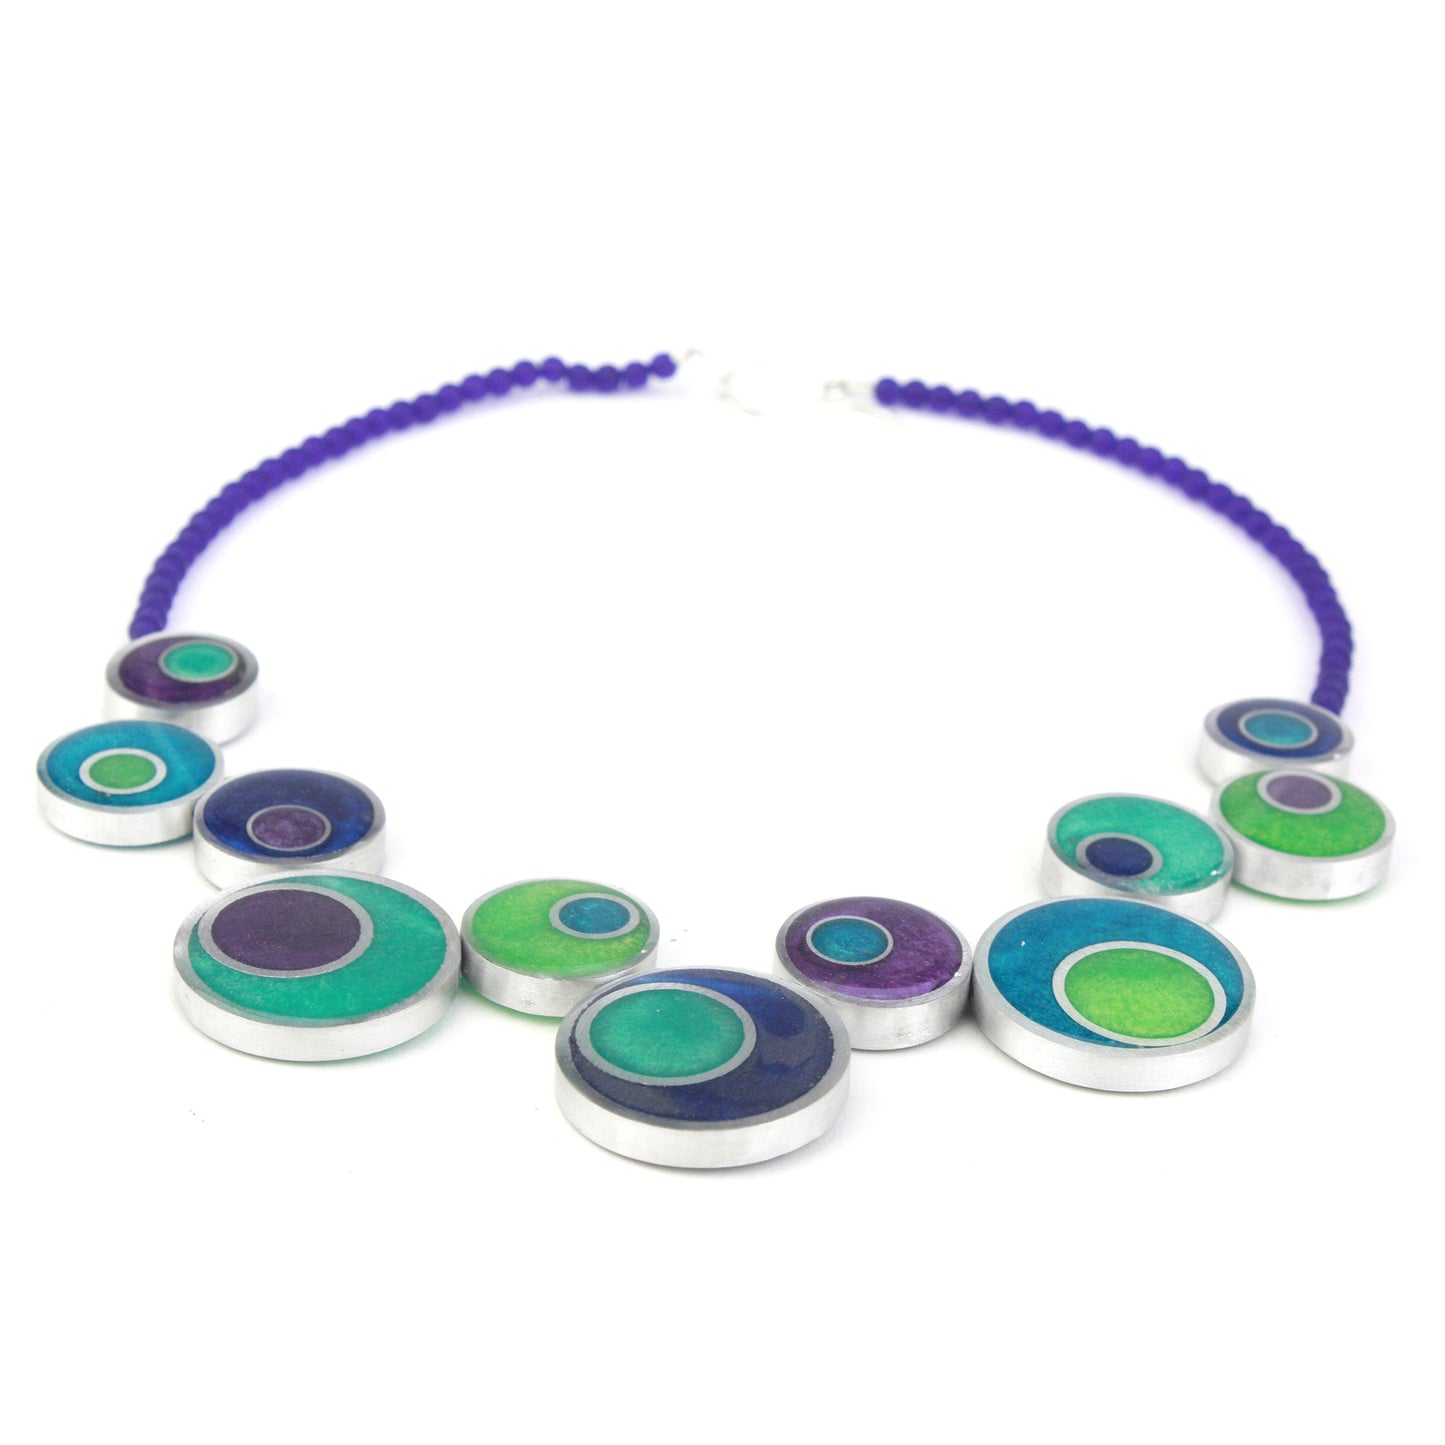 Resinique offset circle necklace - Blues and greens